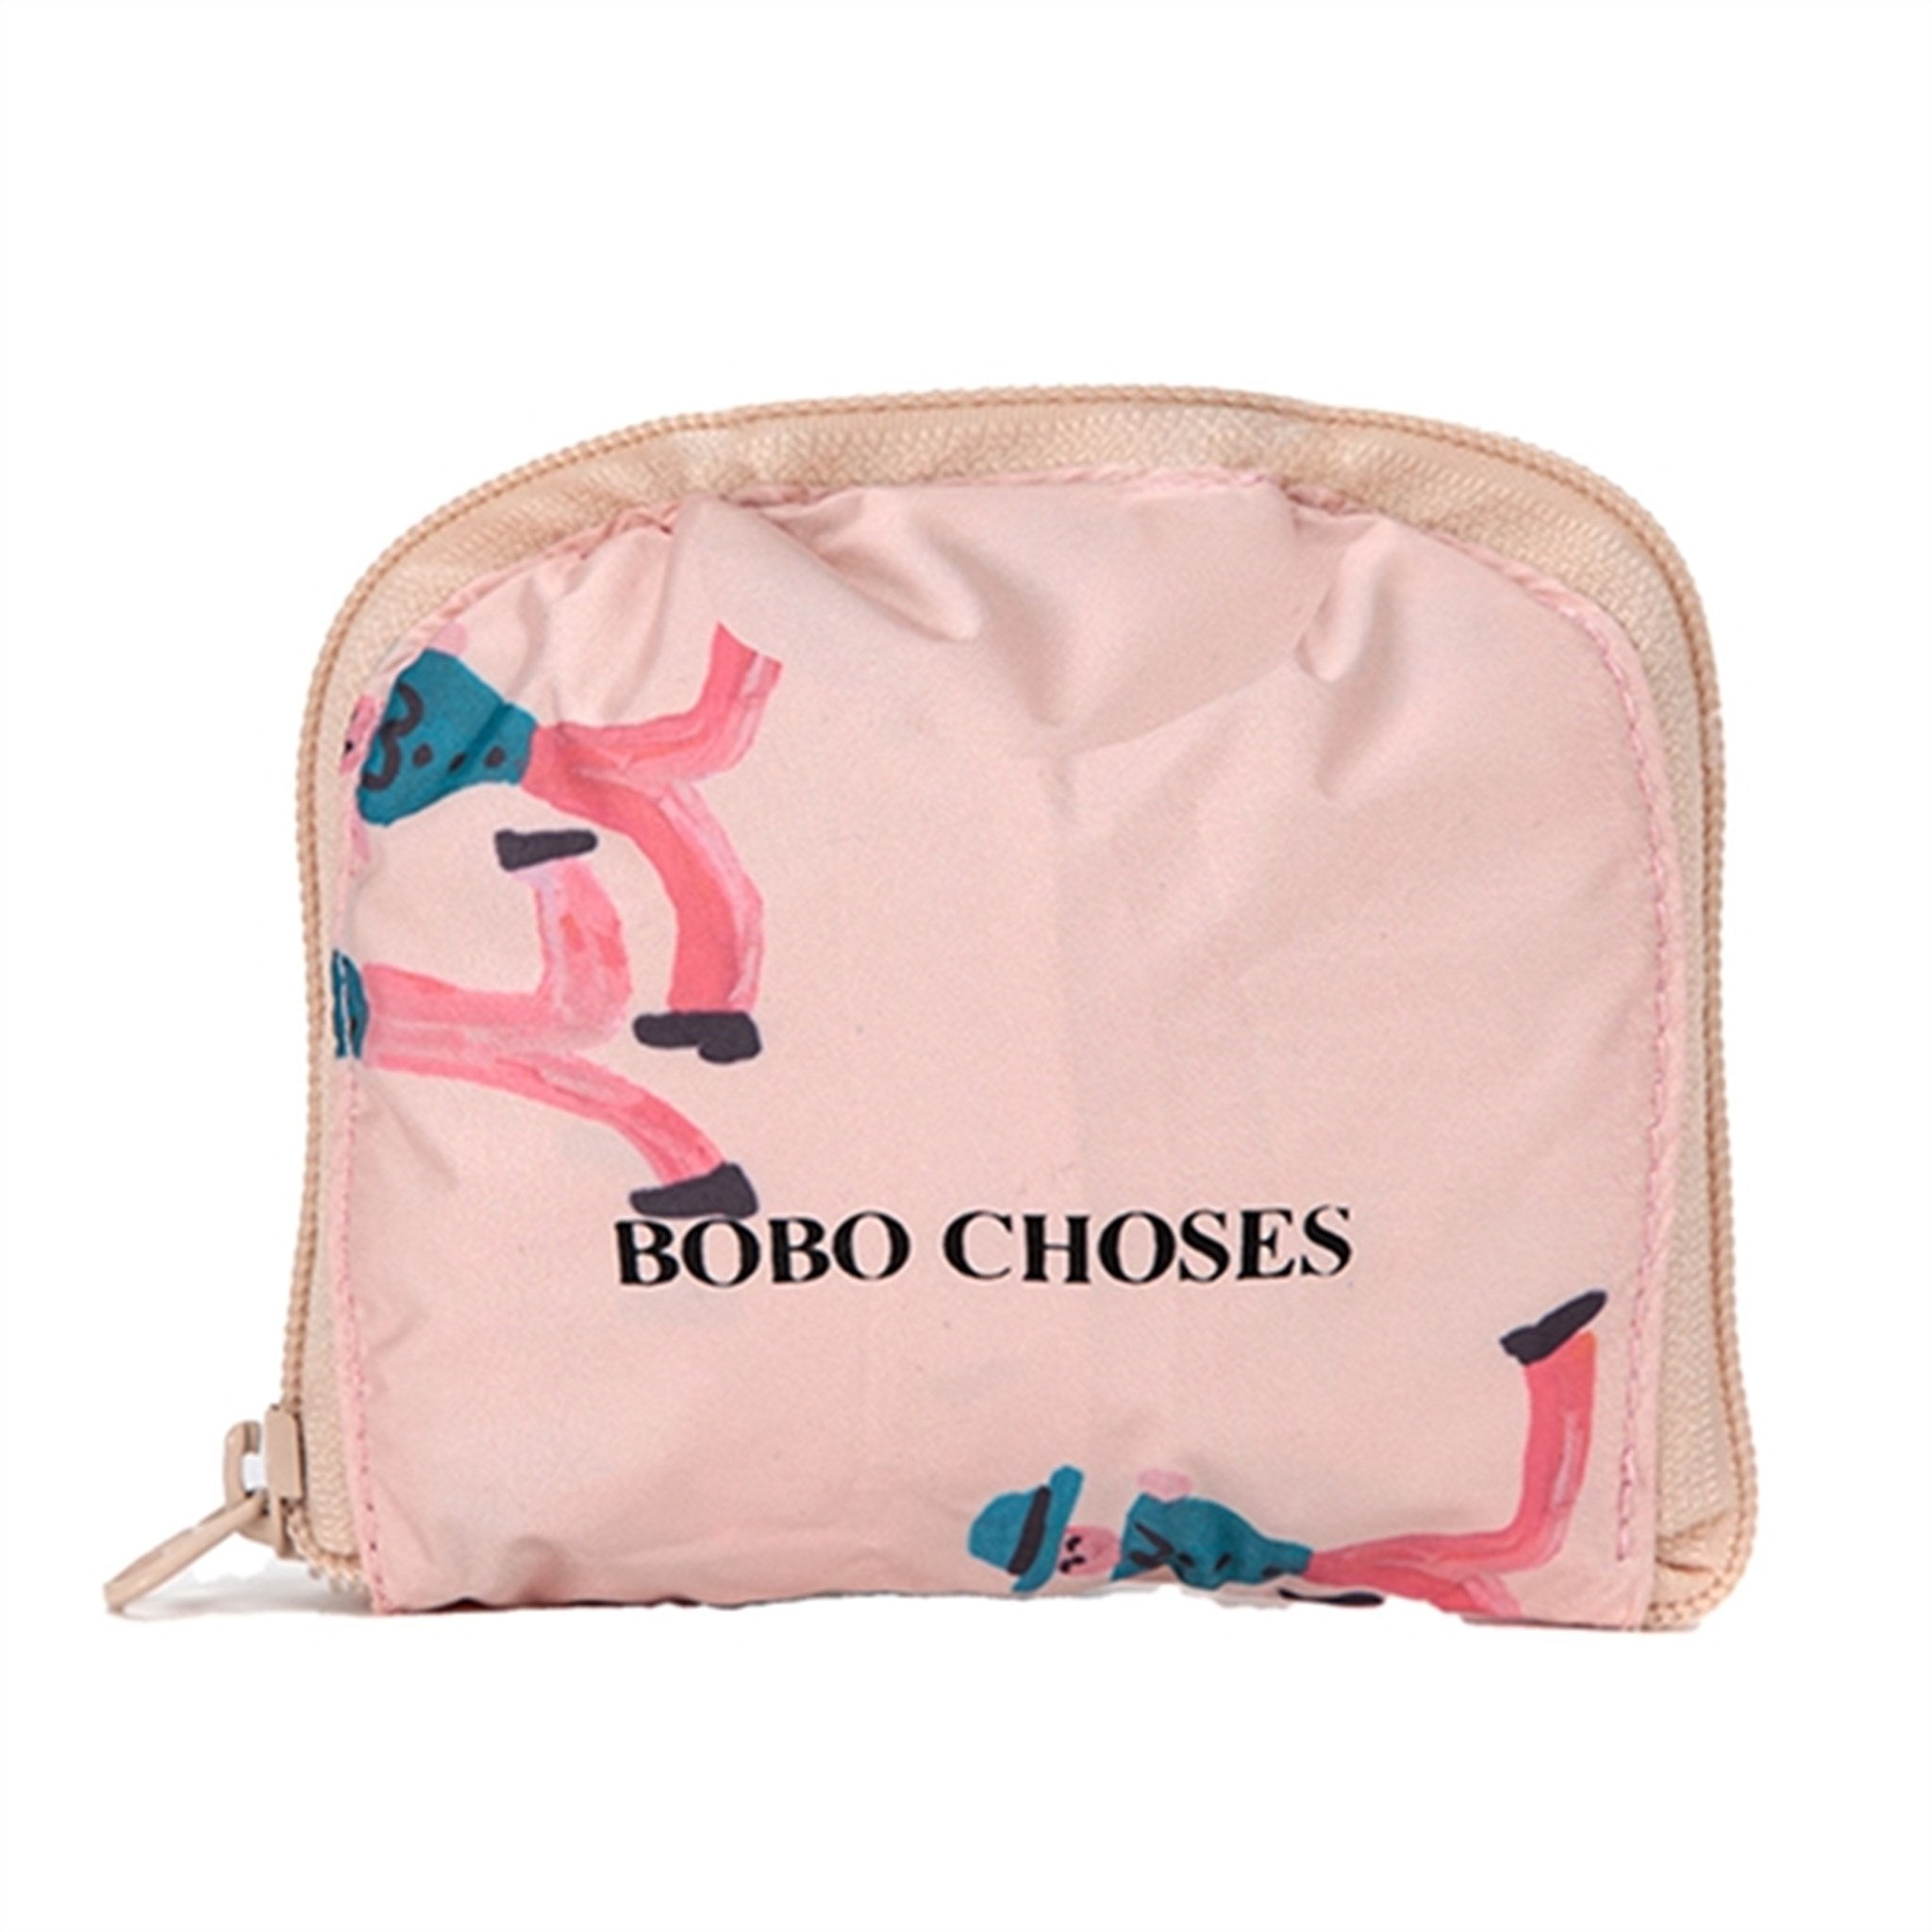 Bobo Choses Dancing Giants All Over Lunch Box Bag Light Pink 4